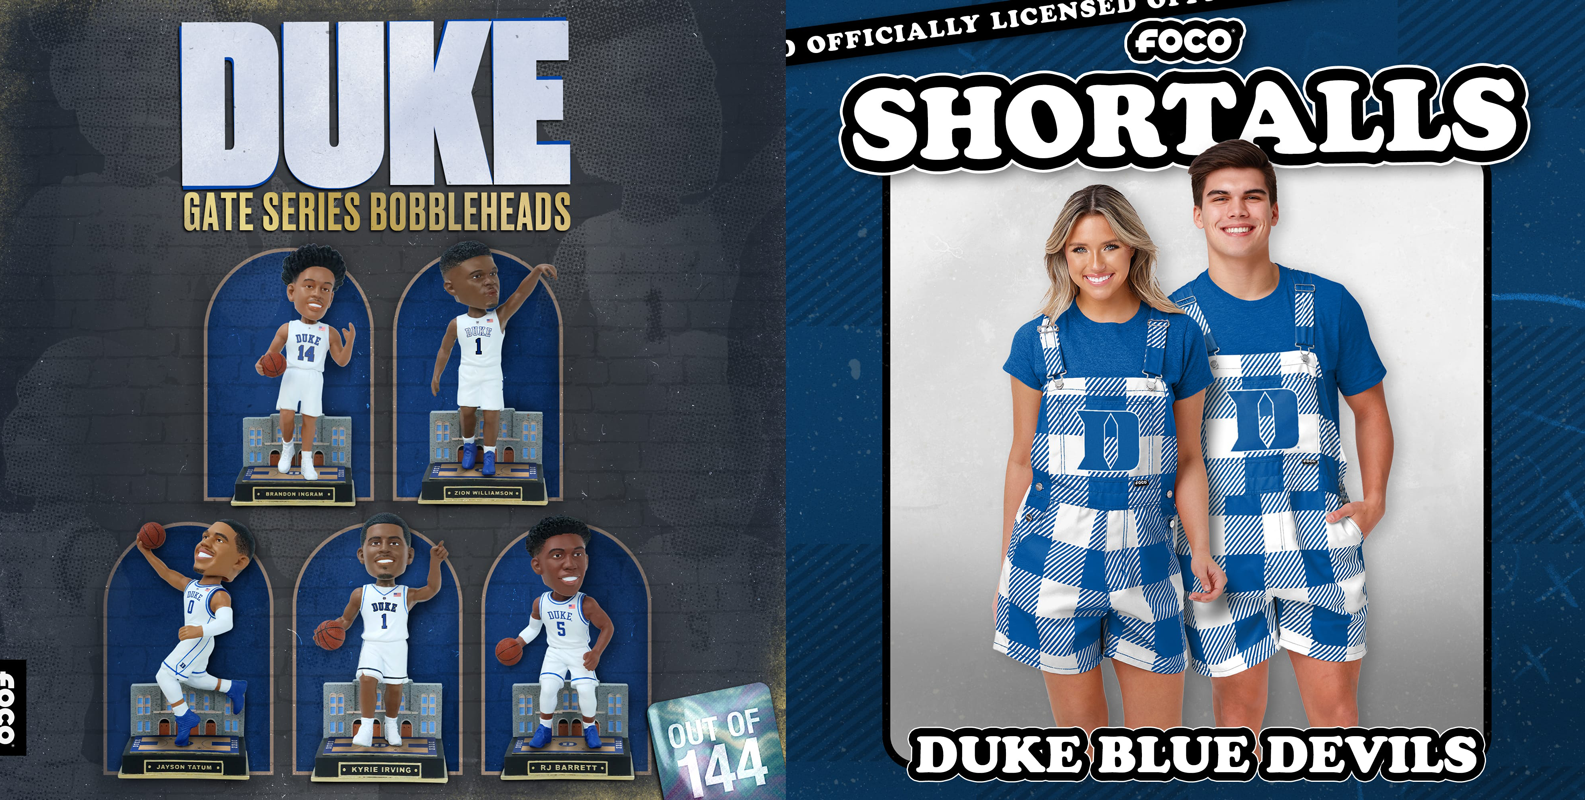 Say Hello To Some Cool New Duke Bobbleheads and An Entire New Collection From FOCO!